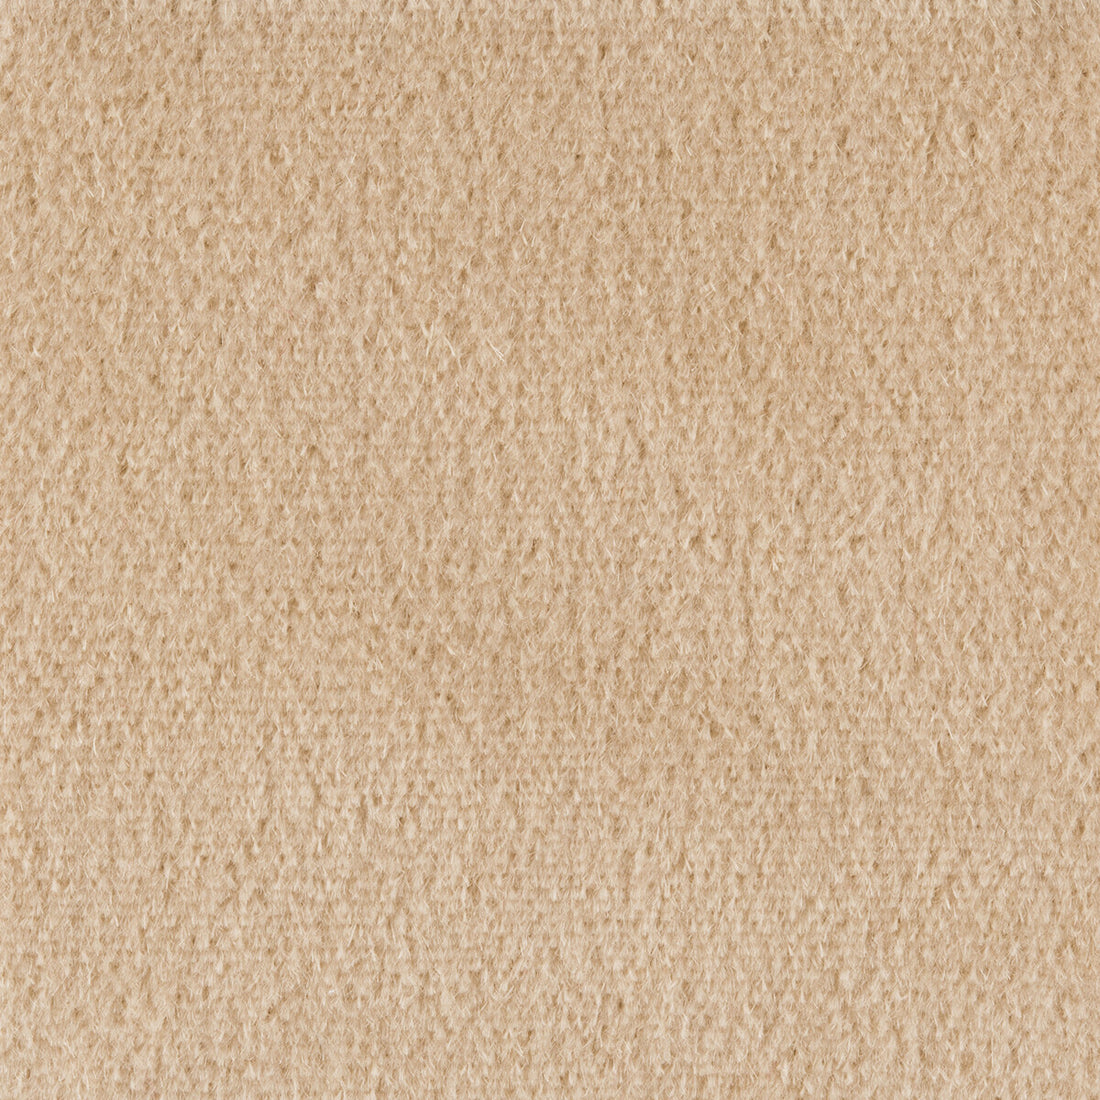 Plazzo Mohair fabric in limestone color - pattern 34259.018.0 - by Kravet Couture